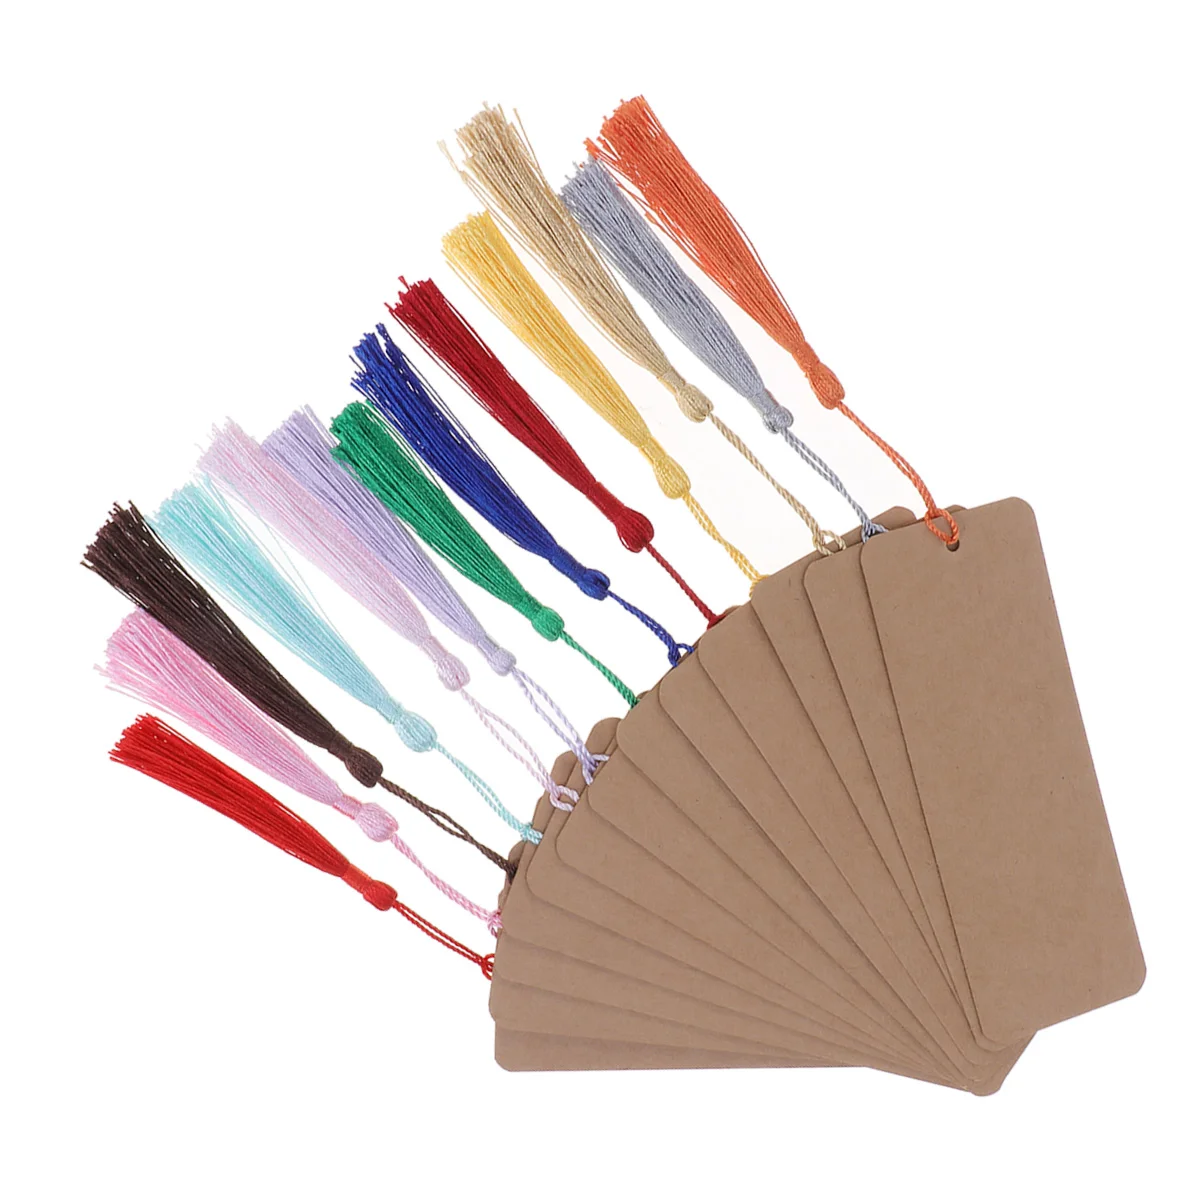 

24pcs Paper Blank Bookmarks with Tassel Cardstock for DIY Projects Gifts Tags School Supply Party Favor (Khaki)